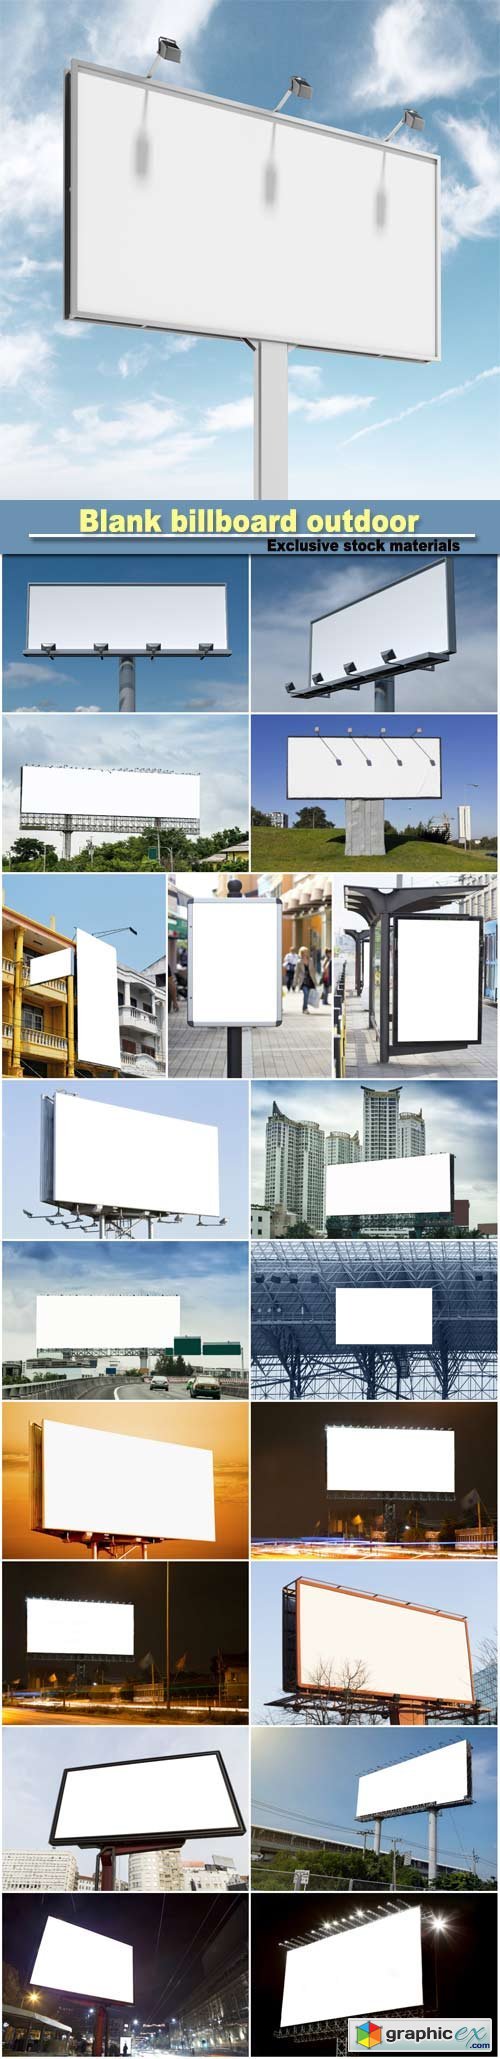 Blank billboard outdoor for advertising poster for advertisement concept